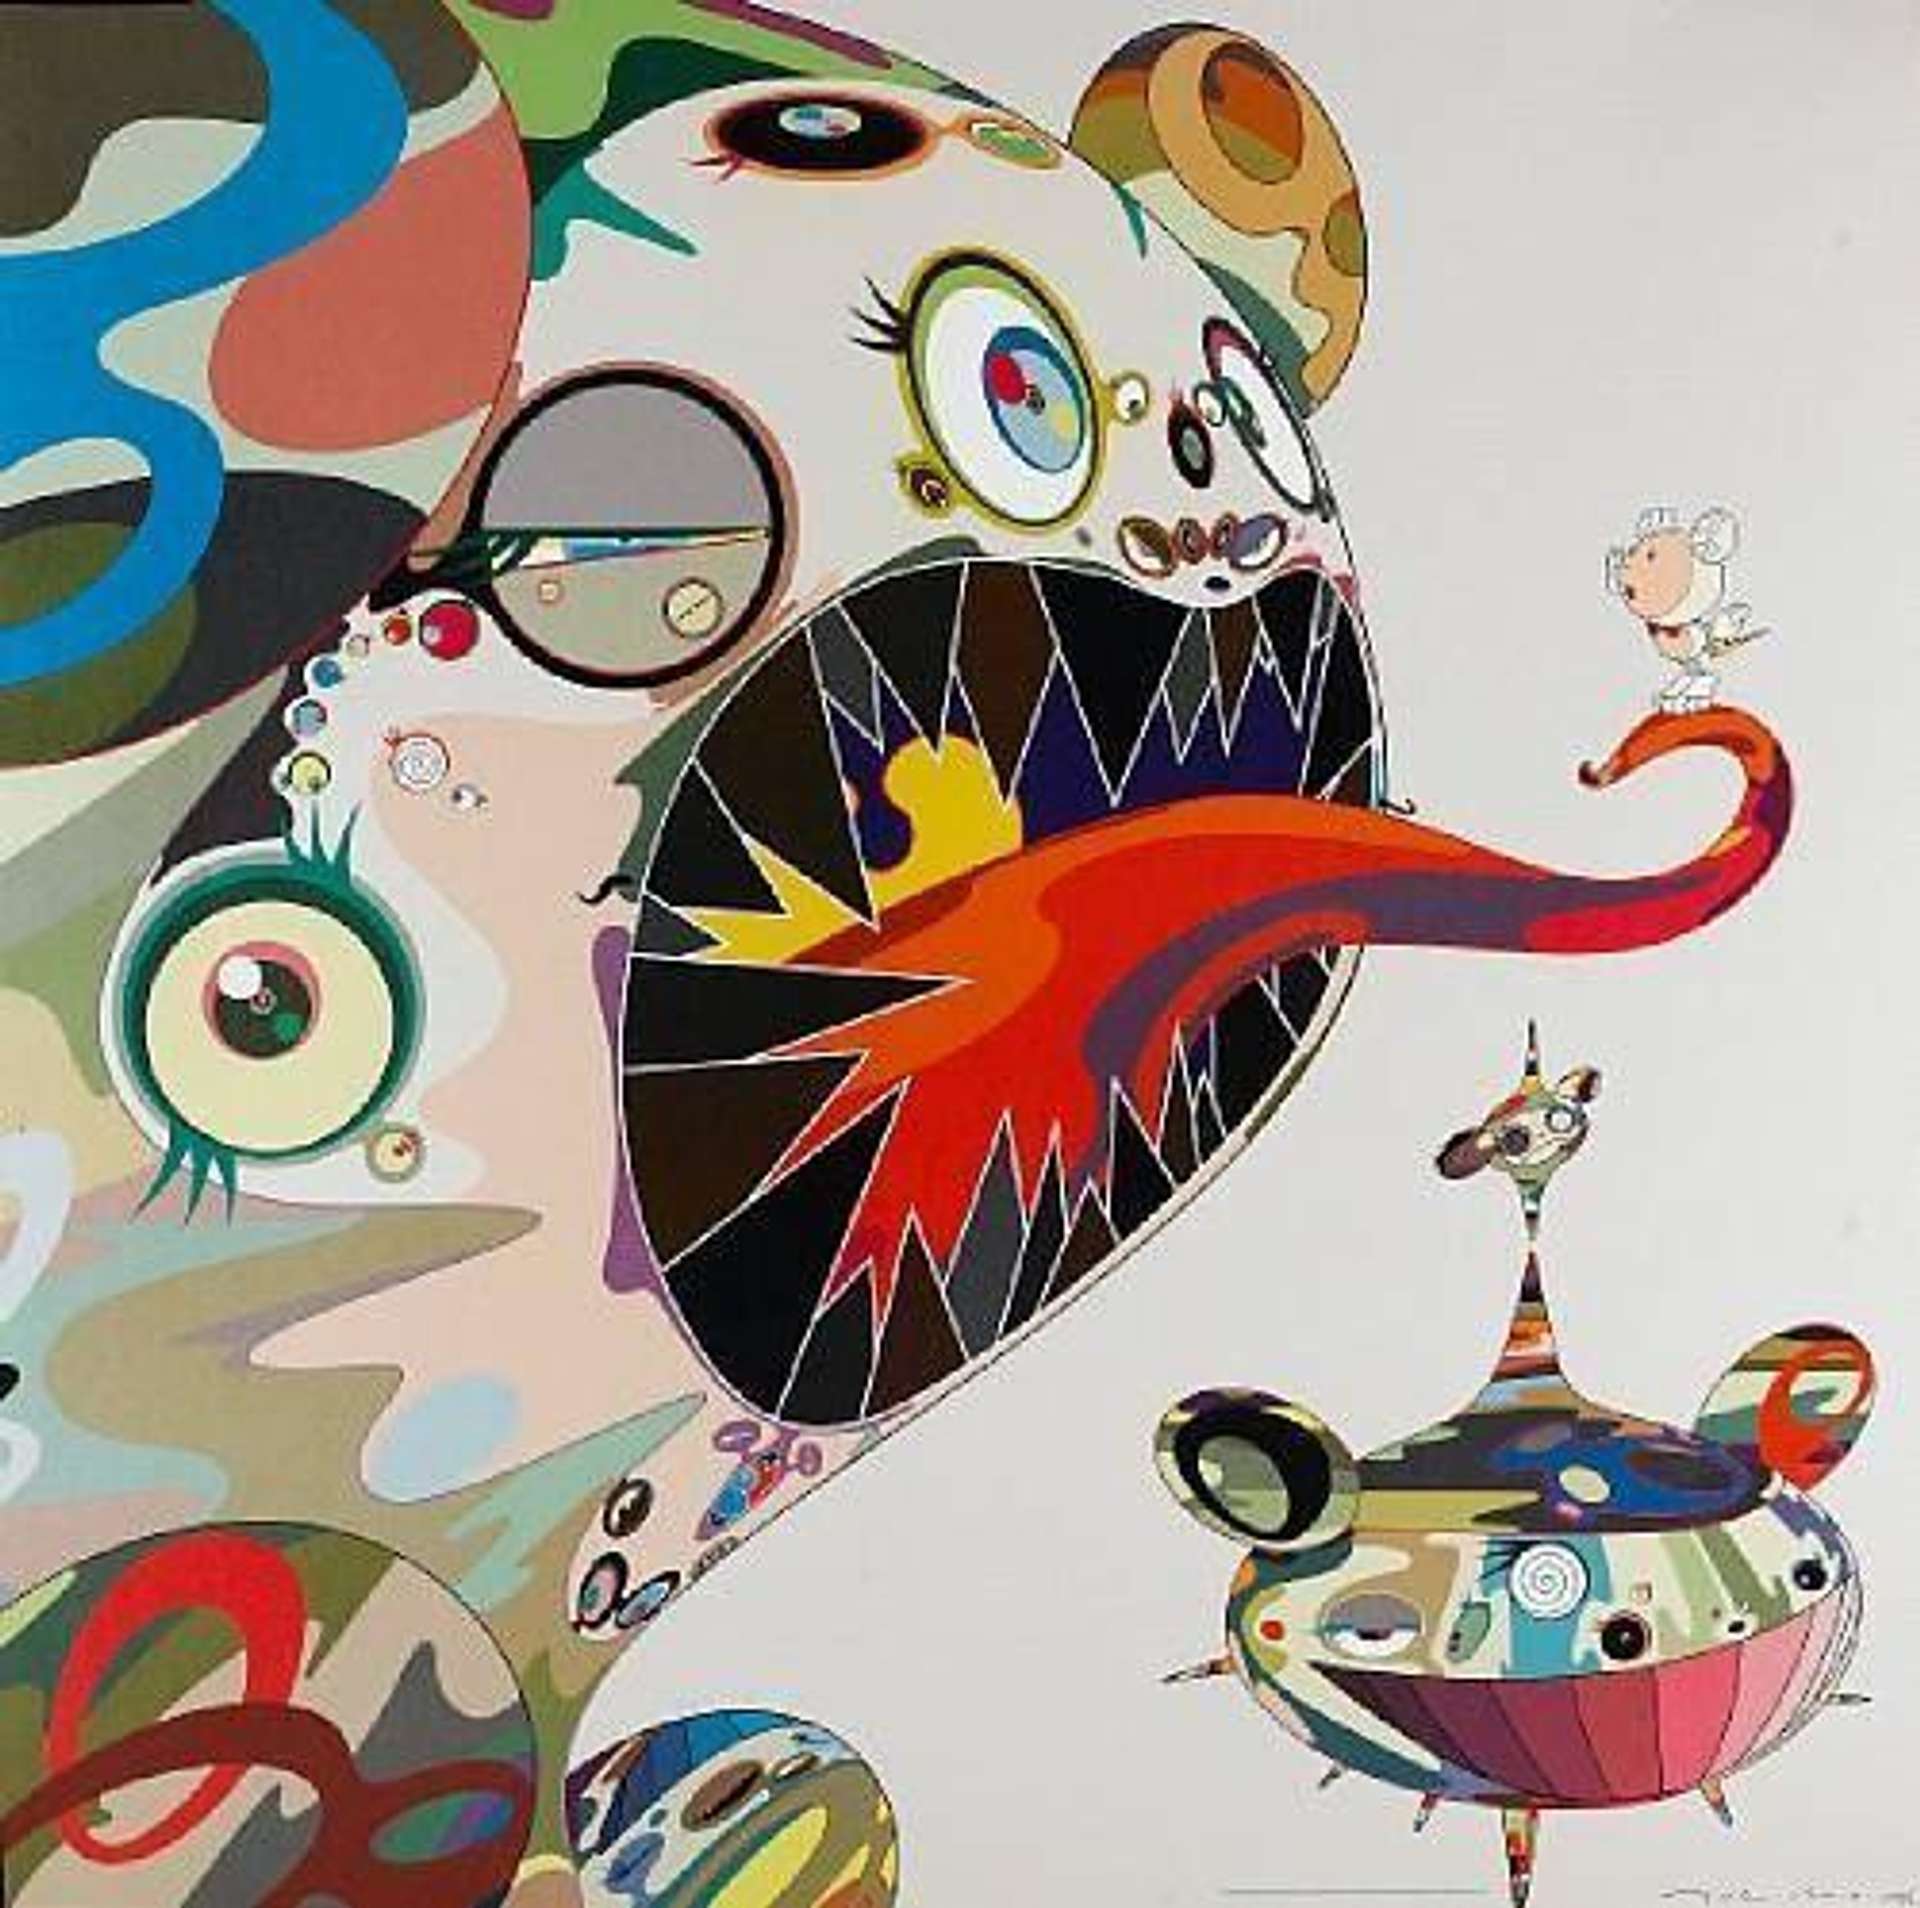 An Homage To Francis Bacon: Study For George Dyer - Signed Print by Takashi Murakami 2003 - MyArtBroker